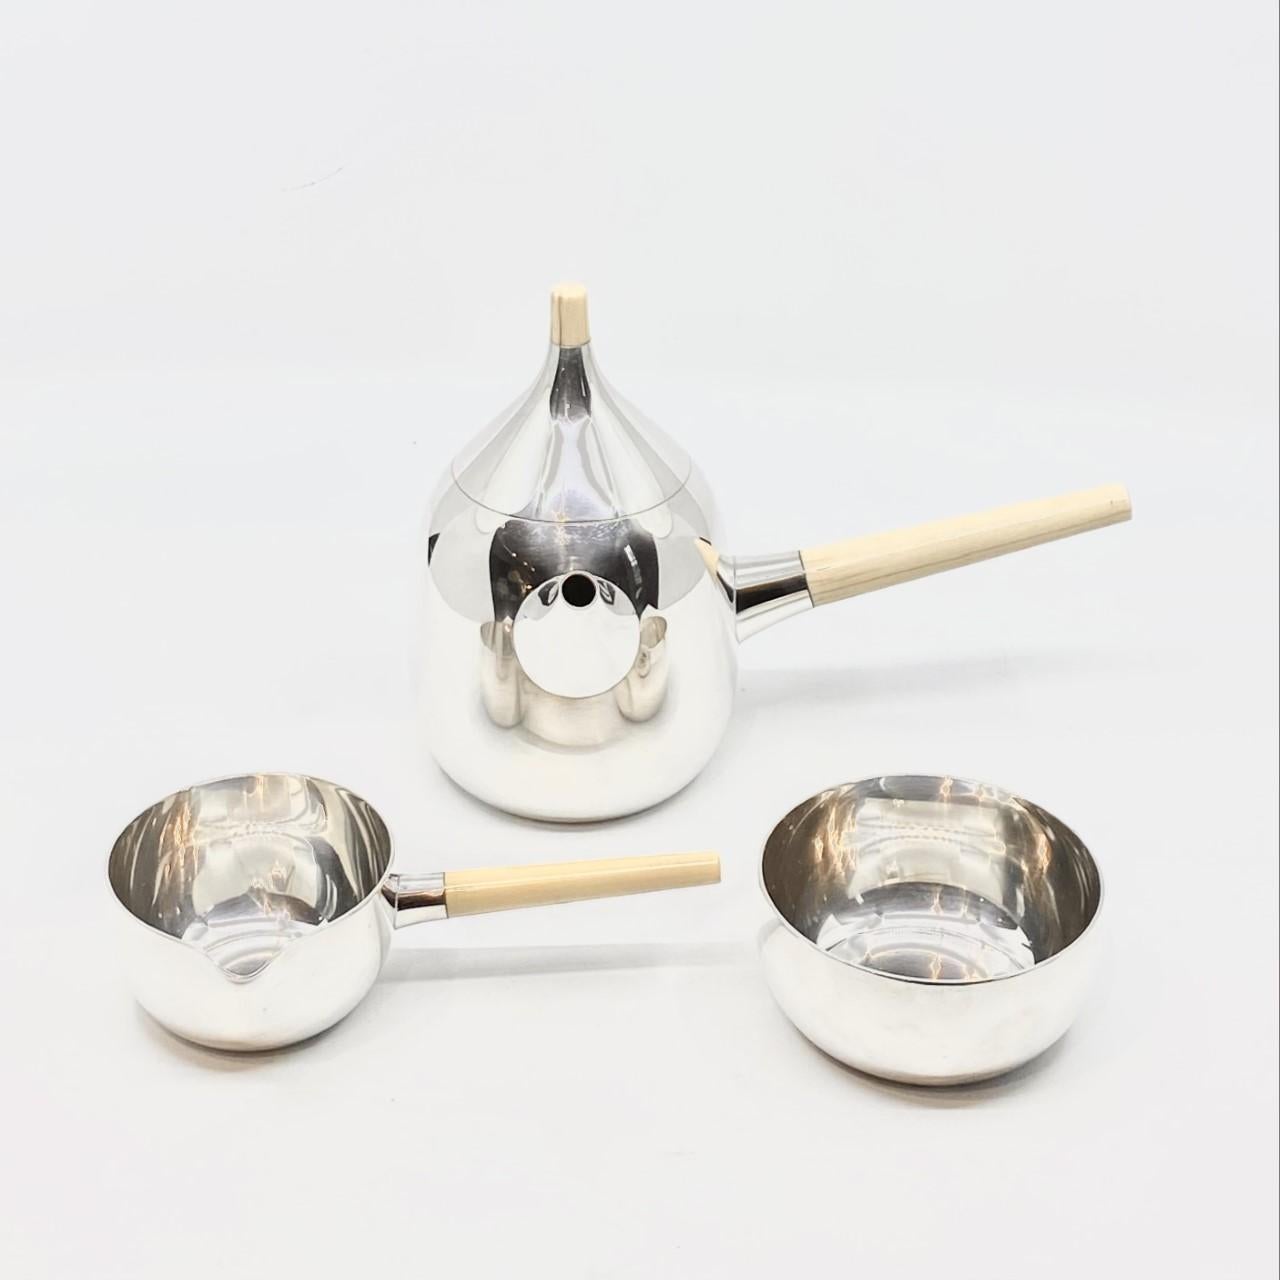 A Mid-Century sterling silver Georg Jensen coffee set with handles of ivory, design #1091 by Henning Koppel from 1961.

Additional information:
Material: Sterling silver
Styles: Modern
Hallmarks: Vintage Georg Jensen hallmarks from 1945-1977,